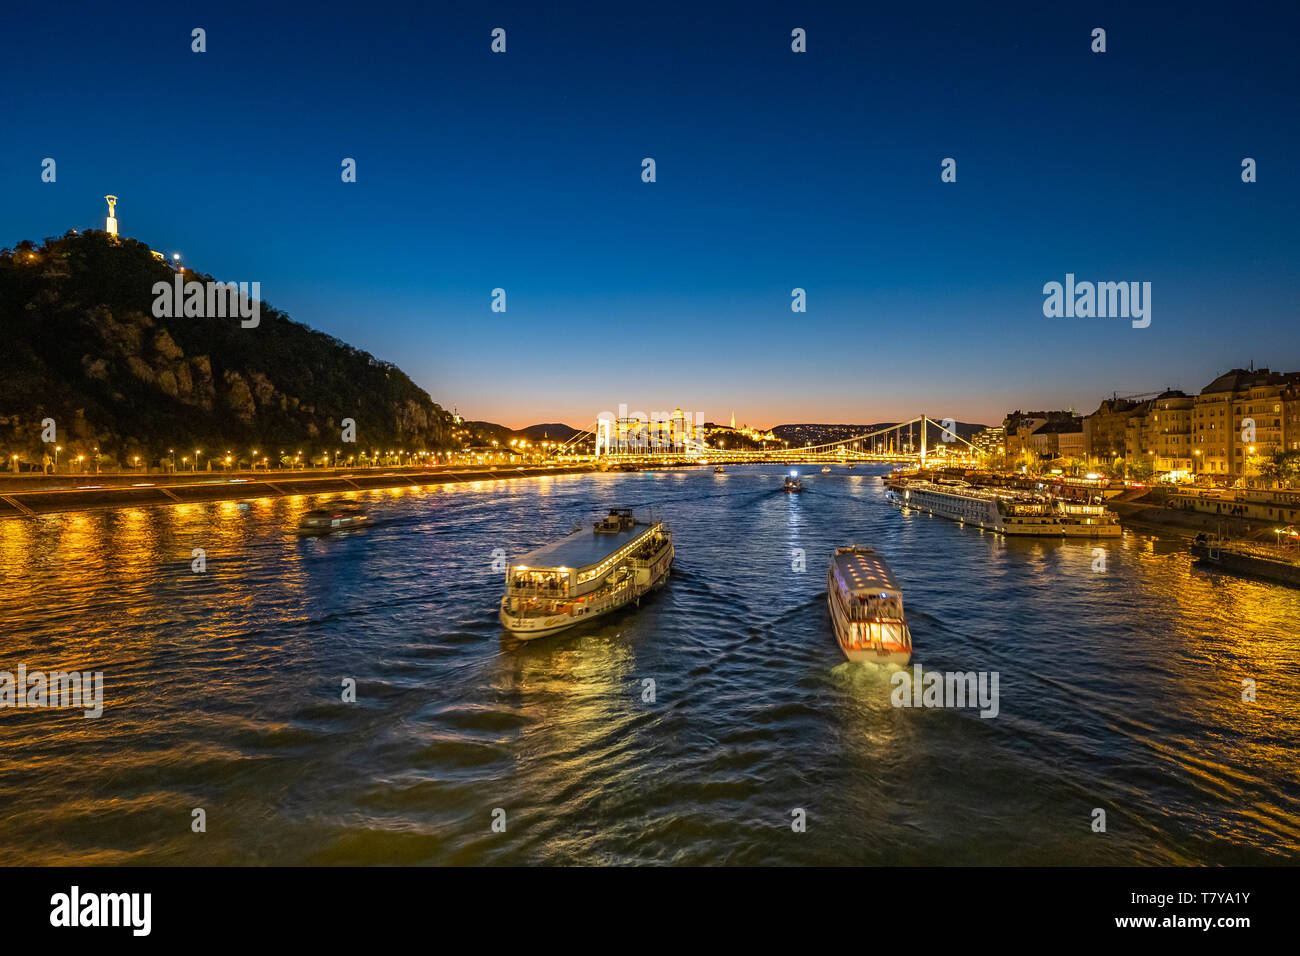 Danube River, view from Liberty Bridge to Elizabeth-Bridge 'Erzsébet híd' and Buda (left) with castle, Gellért Hill, Liberty Statue, and Pest (right ) Stock Photo